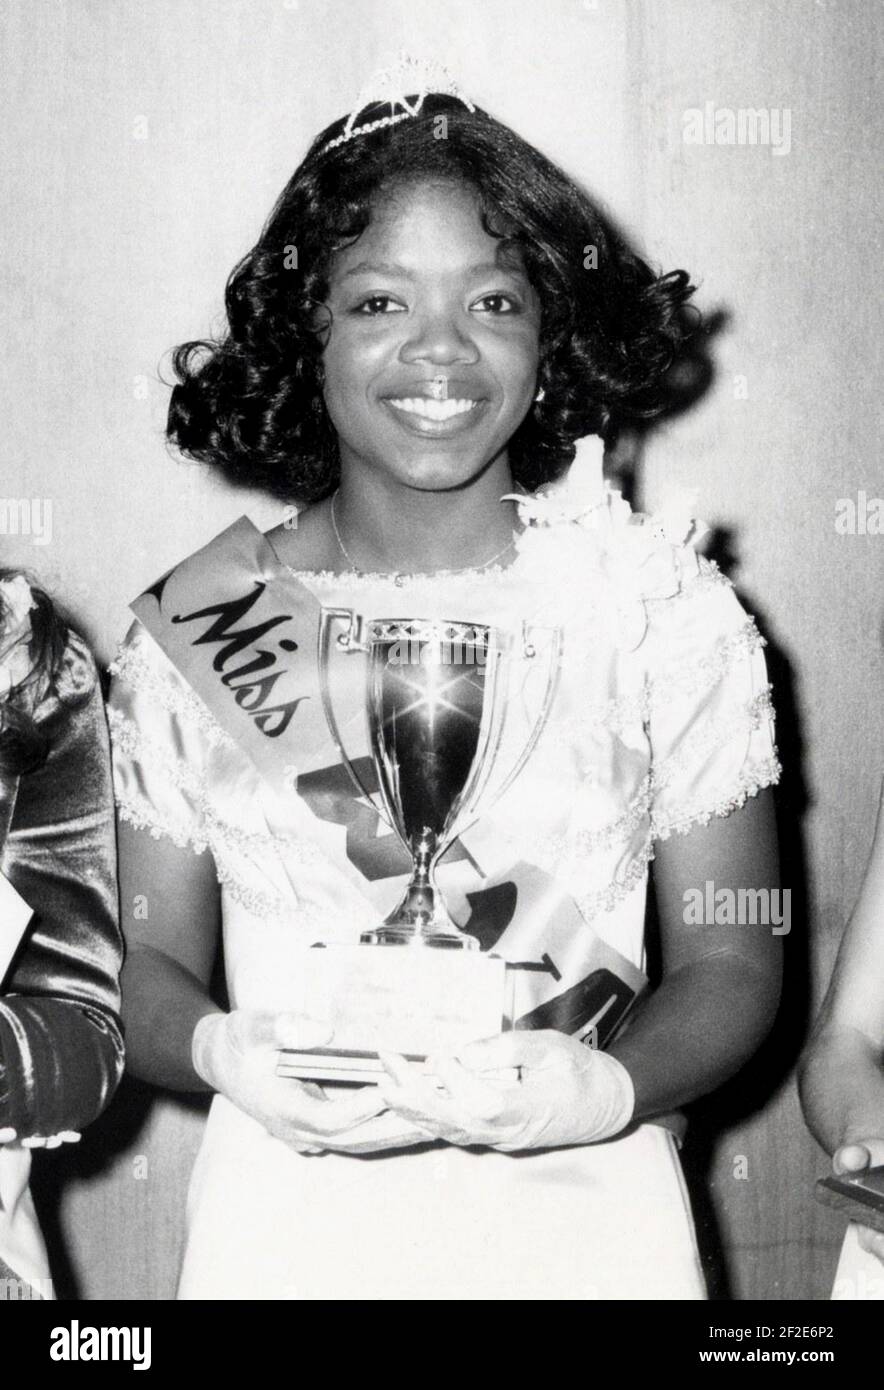 1971 , USA : The celebrated American television talk show host, journalist , writer and producer OPRAH WINFREY ( born 29 january 1954 ), when was young aged 17 and wins The Miss Black Tennessee Beauty Pageant . She also attracted the attention of the local black radio station, WVOL, which hired her to do the news part-time. She worked there during her senior year of high school, and again while in her first two years of college .  Unknown photographer. - HISTORY - FOTO STORICHE - personalità da giovane giovani - personality personalities when was young - PORTRAIT - RITRATTO - GIORNALISTA - JOU Stock Photo